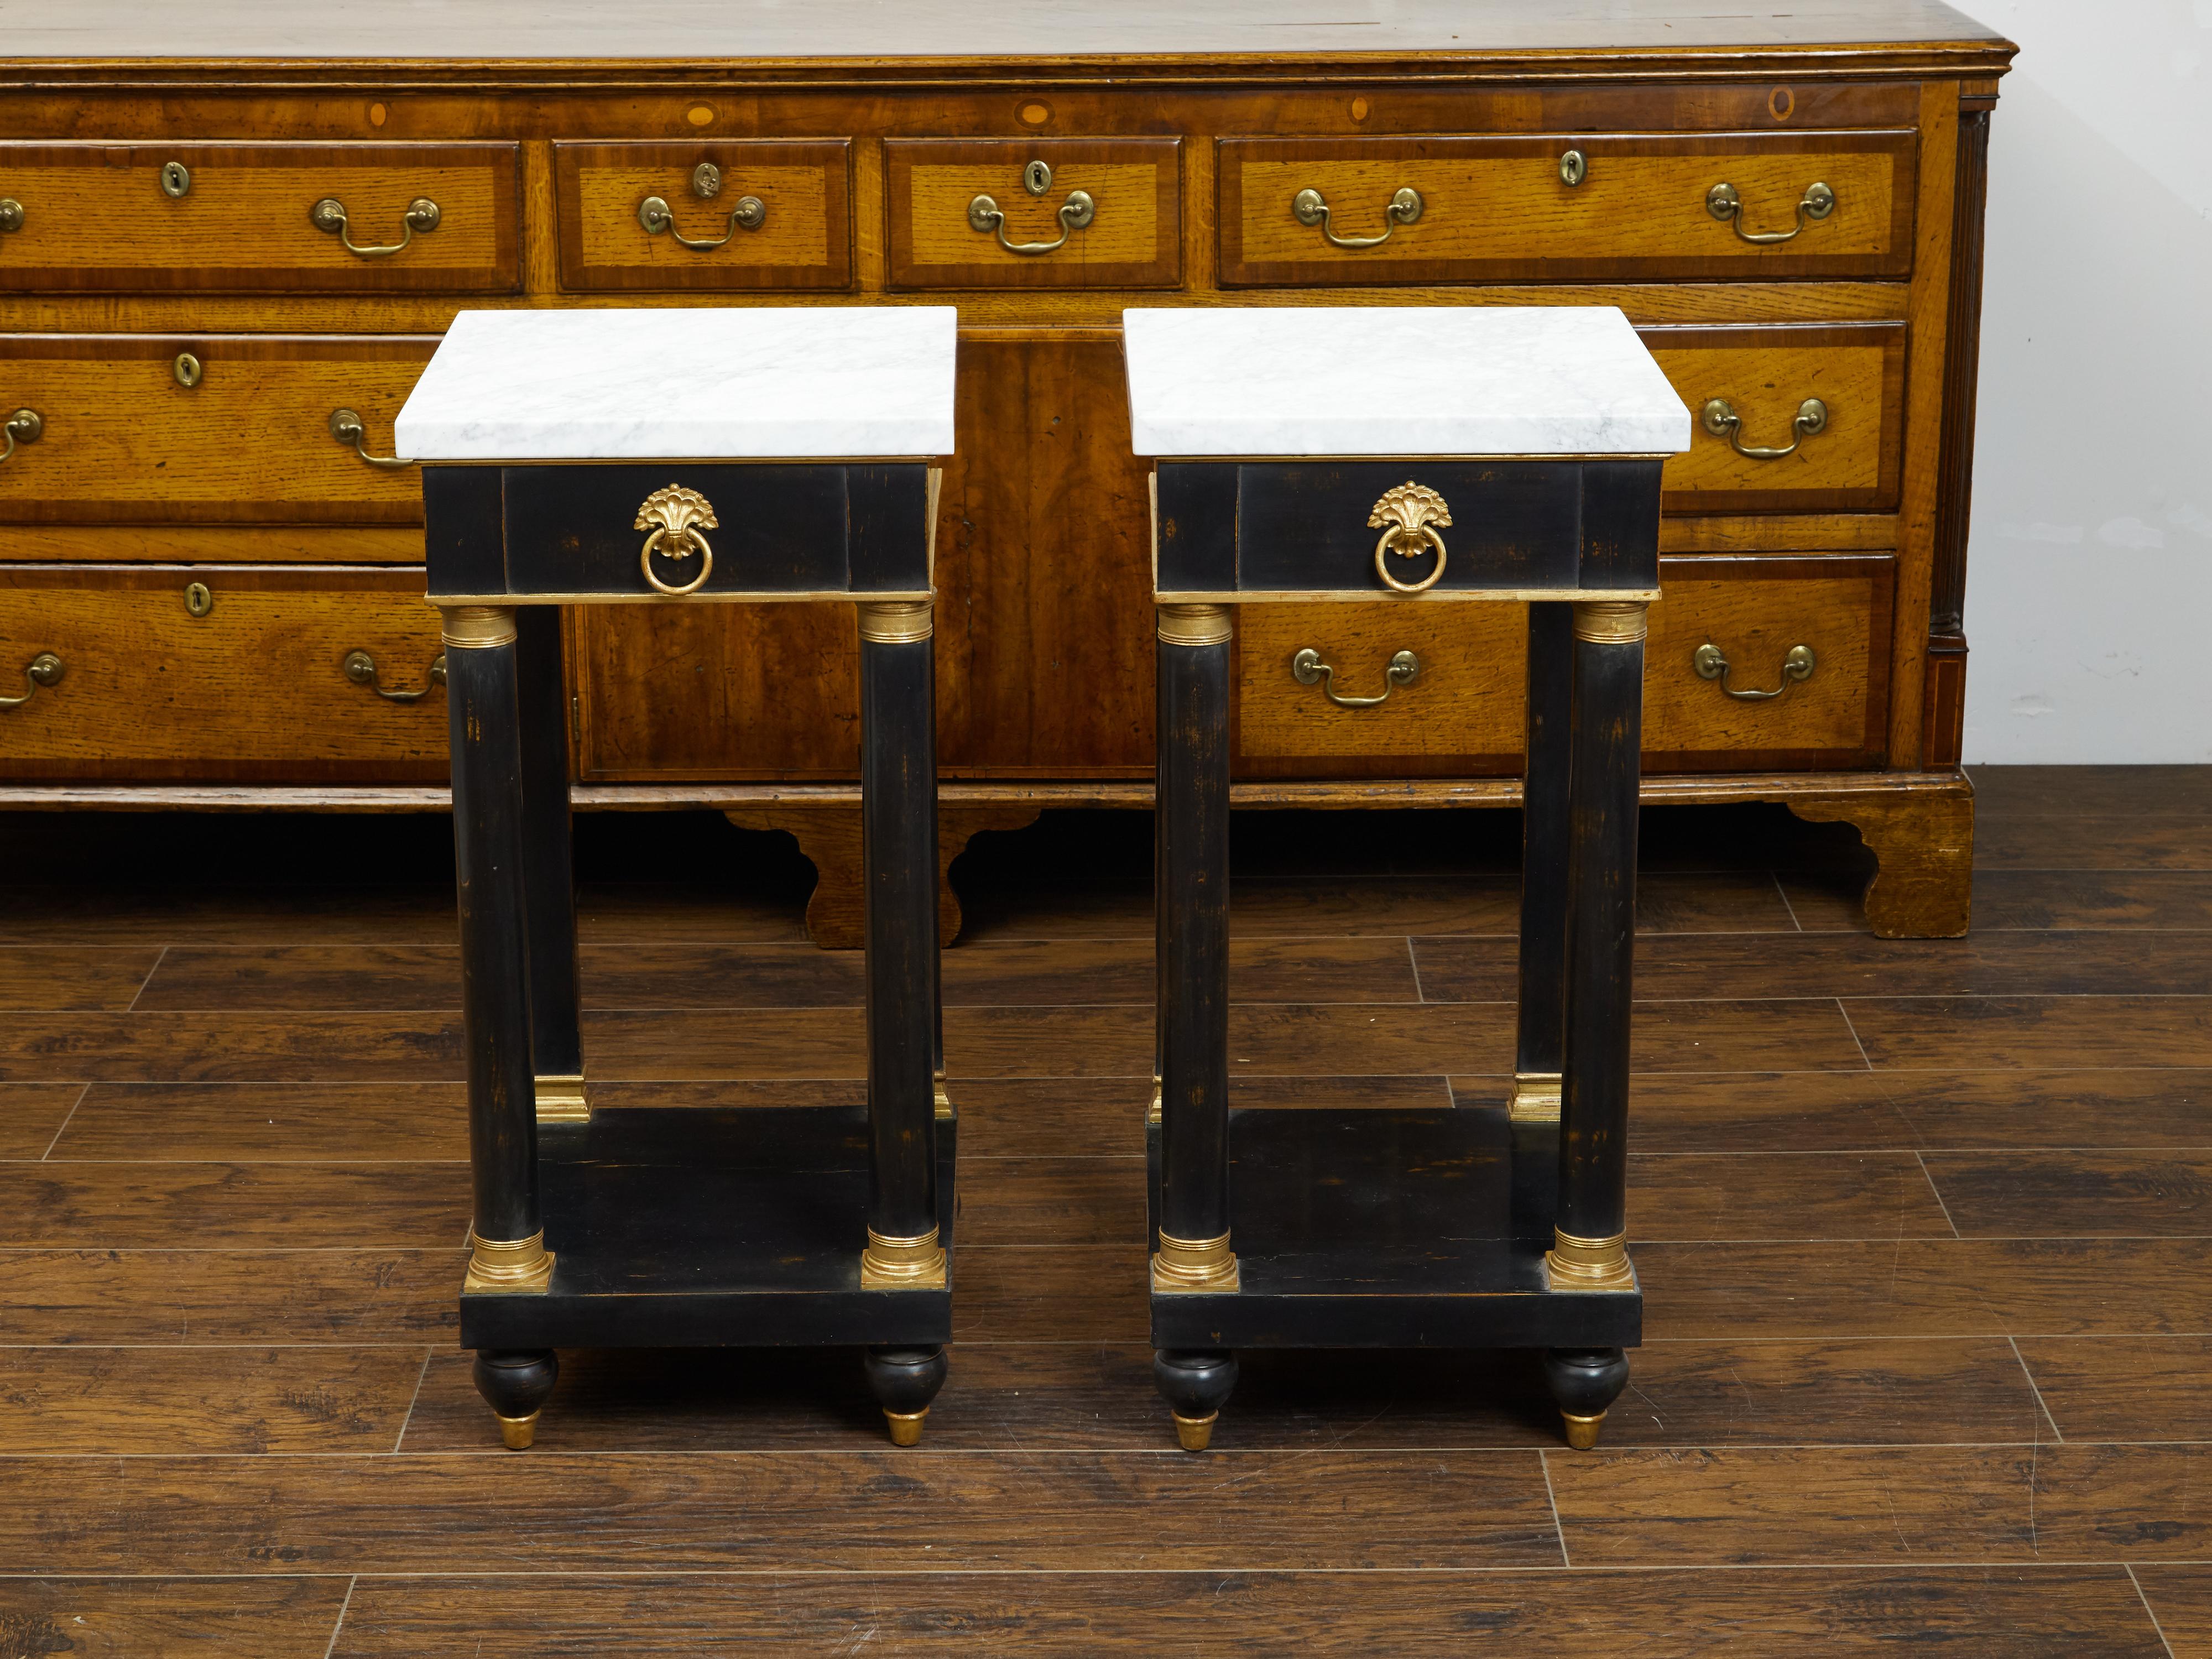 A pair of French Empire style ebonized side tables from the mid 20th century, with marble tops and gilded accents. Created in France during the first half of the 20th century, each of this pair of tables features a square-shaped white veined marble